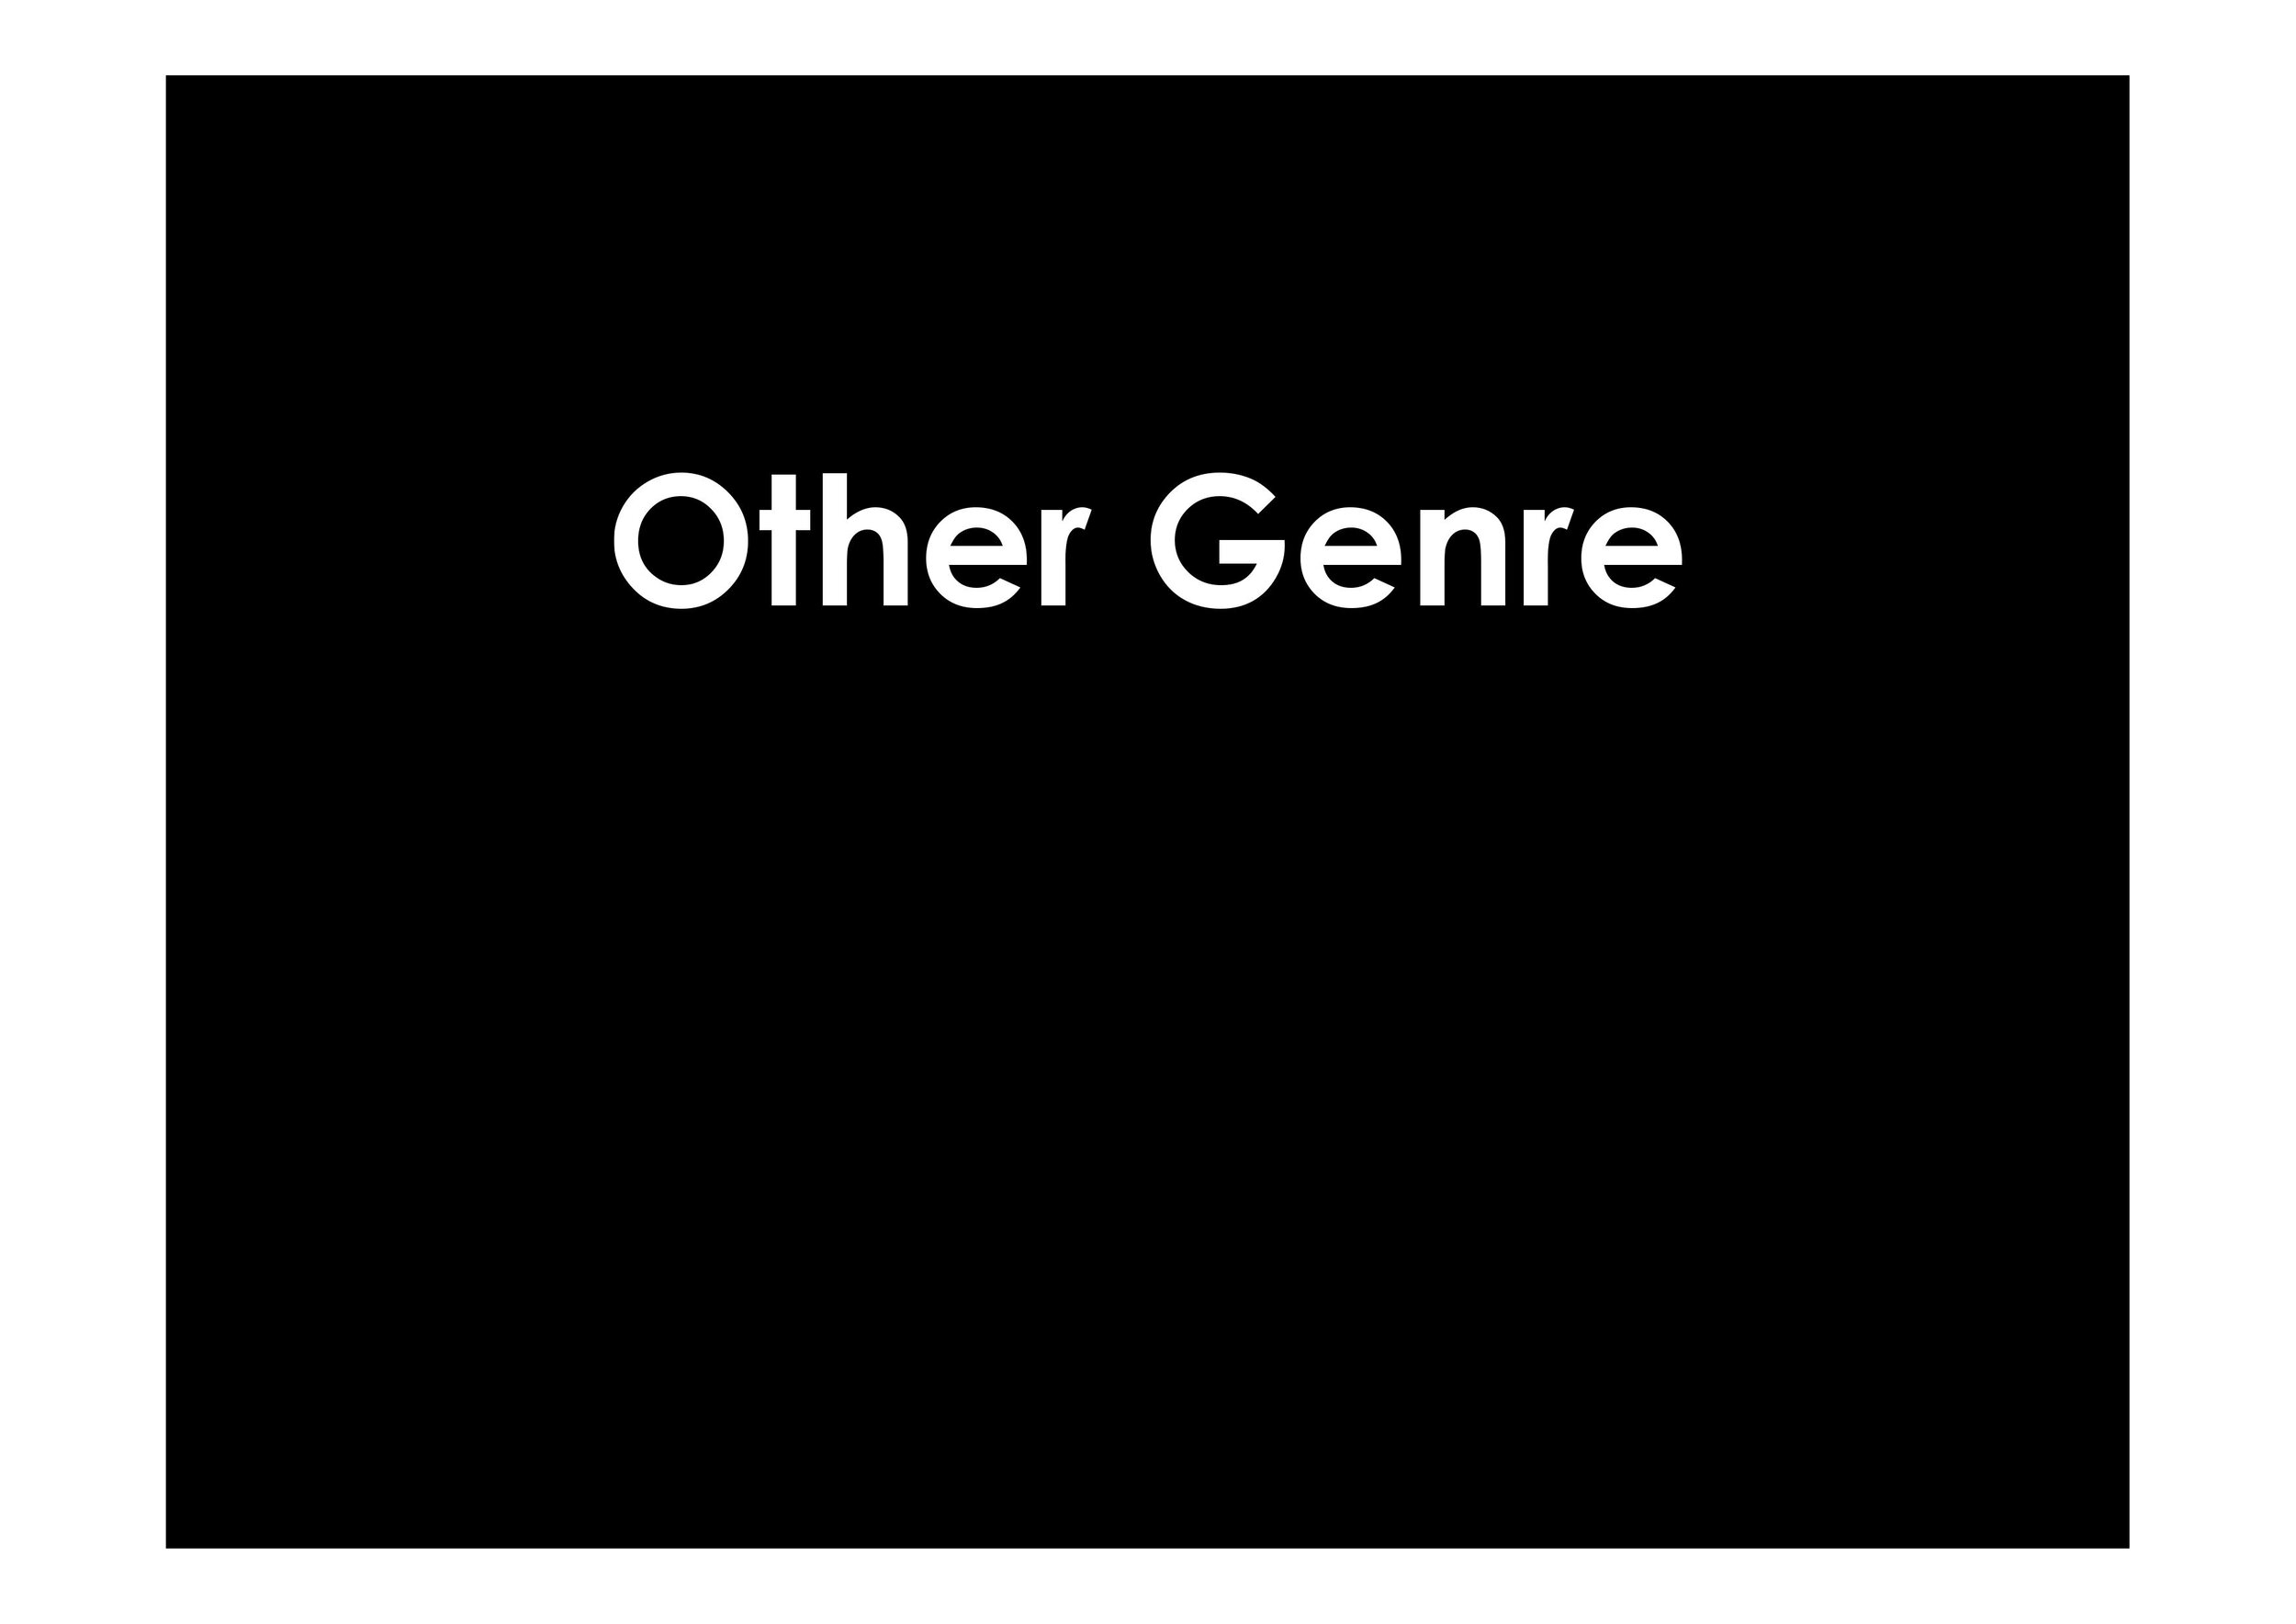  Other genre 